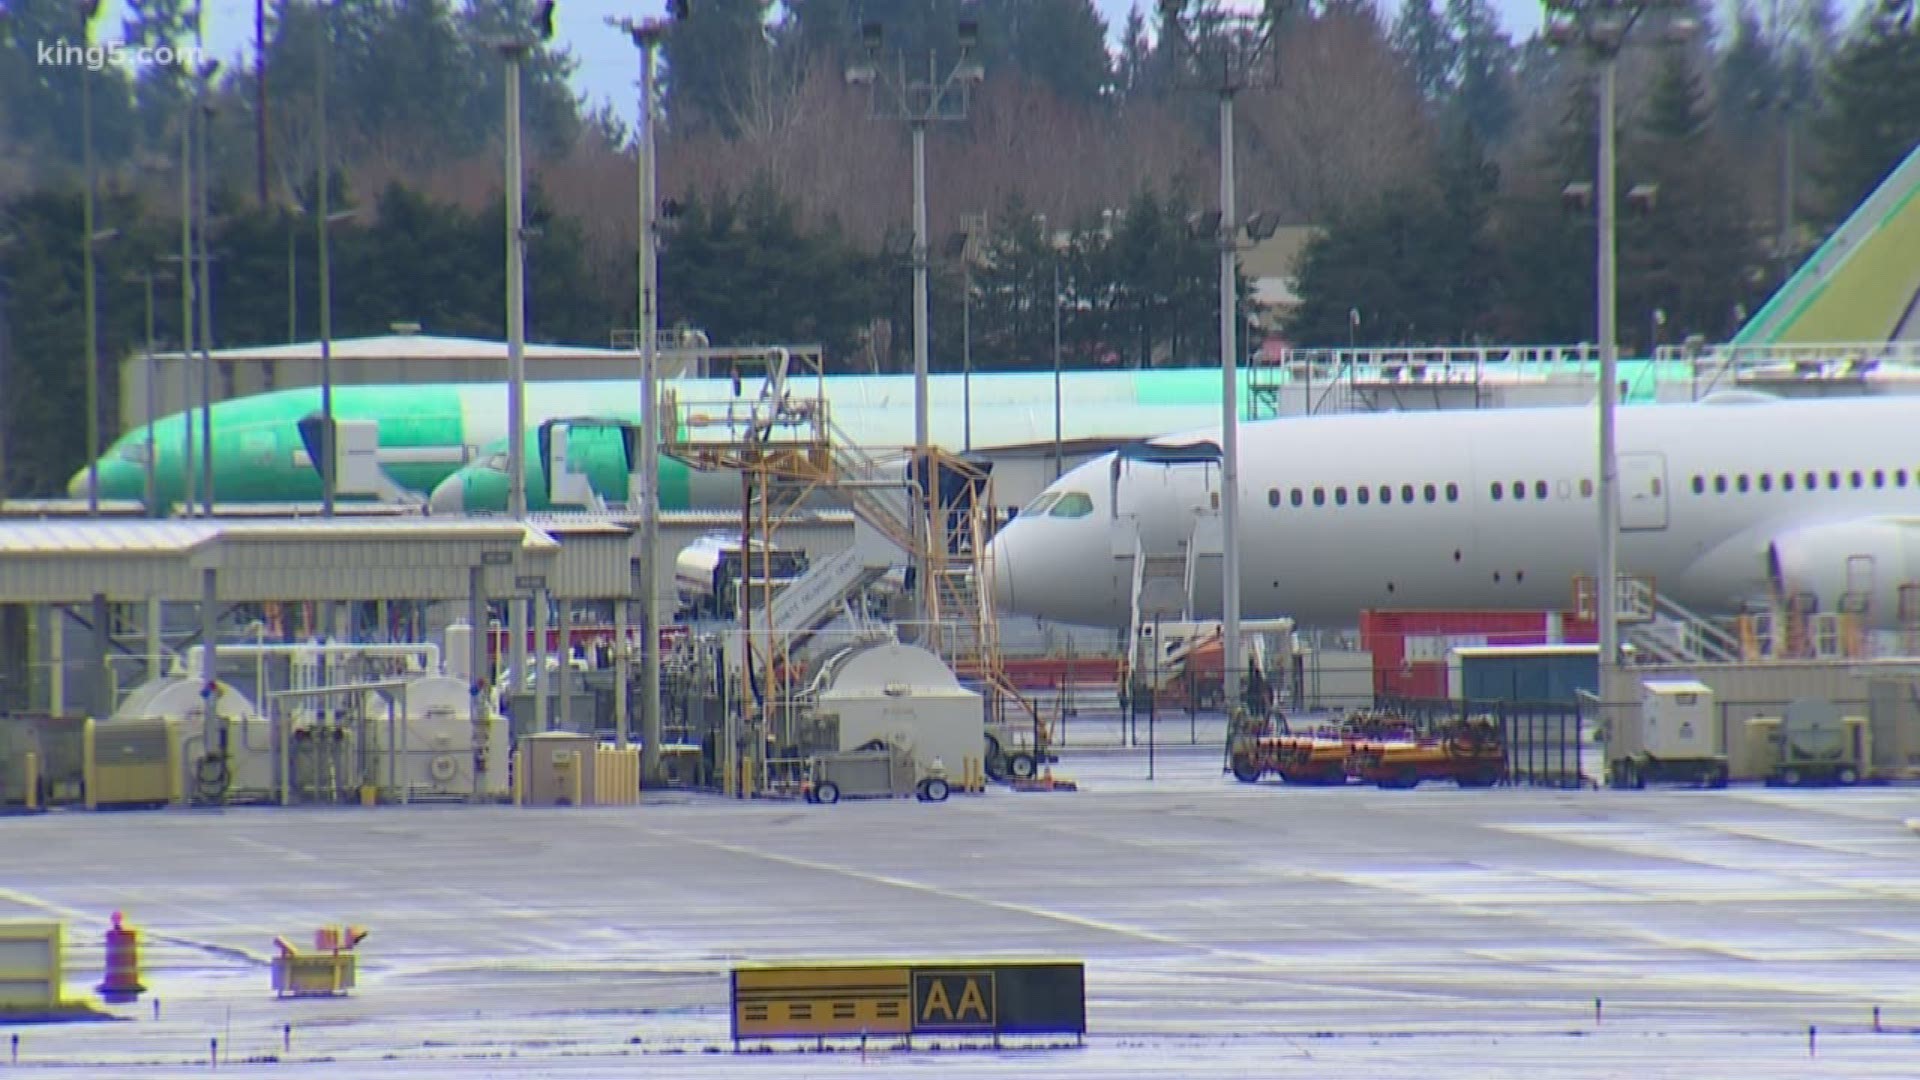 Alaska Airlines will cut back on flights as it becomes the latest airline to deal with the dramatic drop off in business due to the coronavirus.